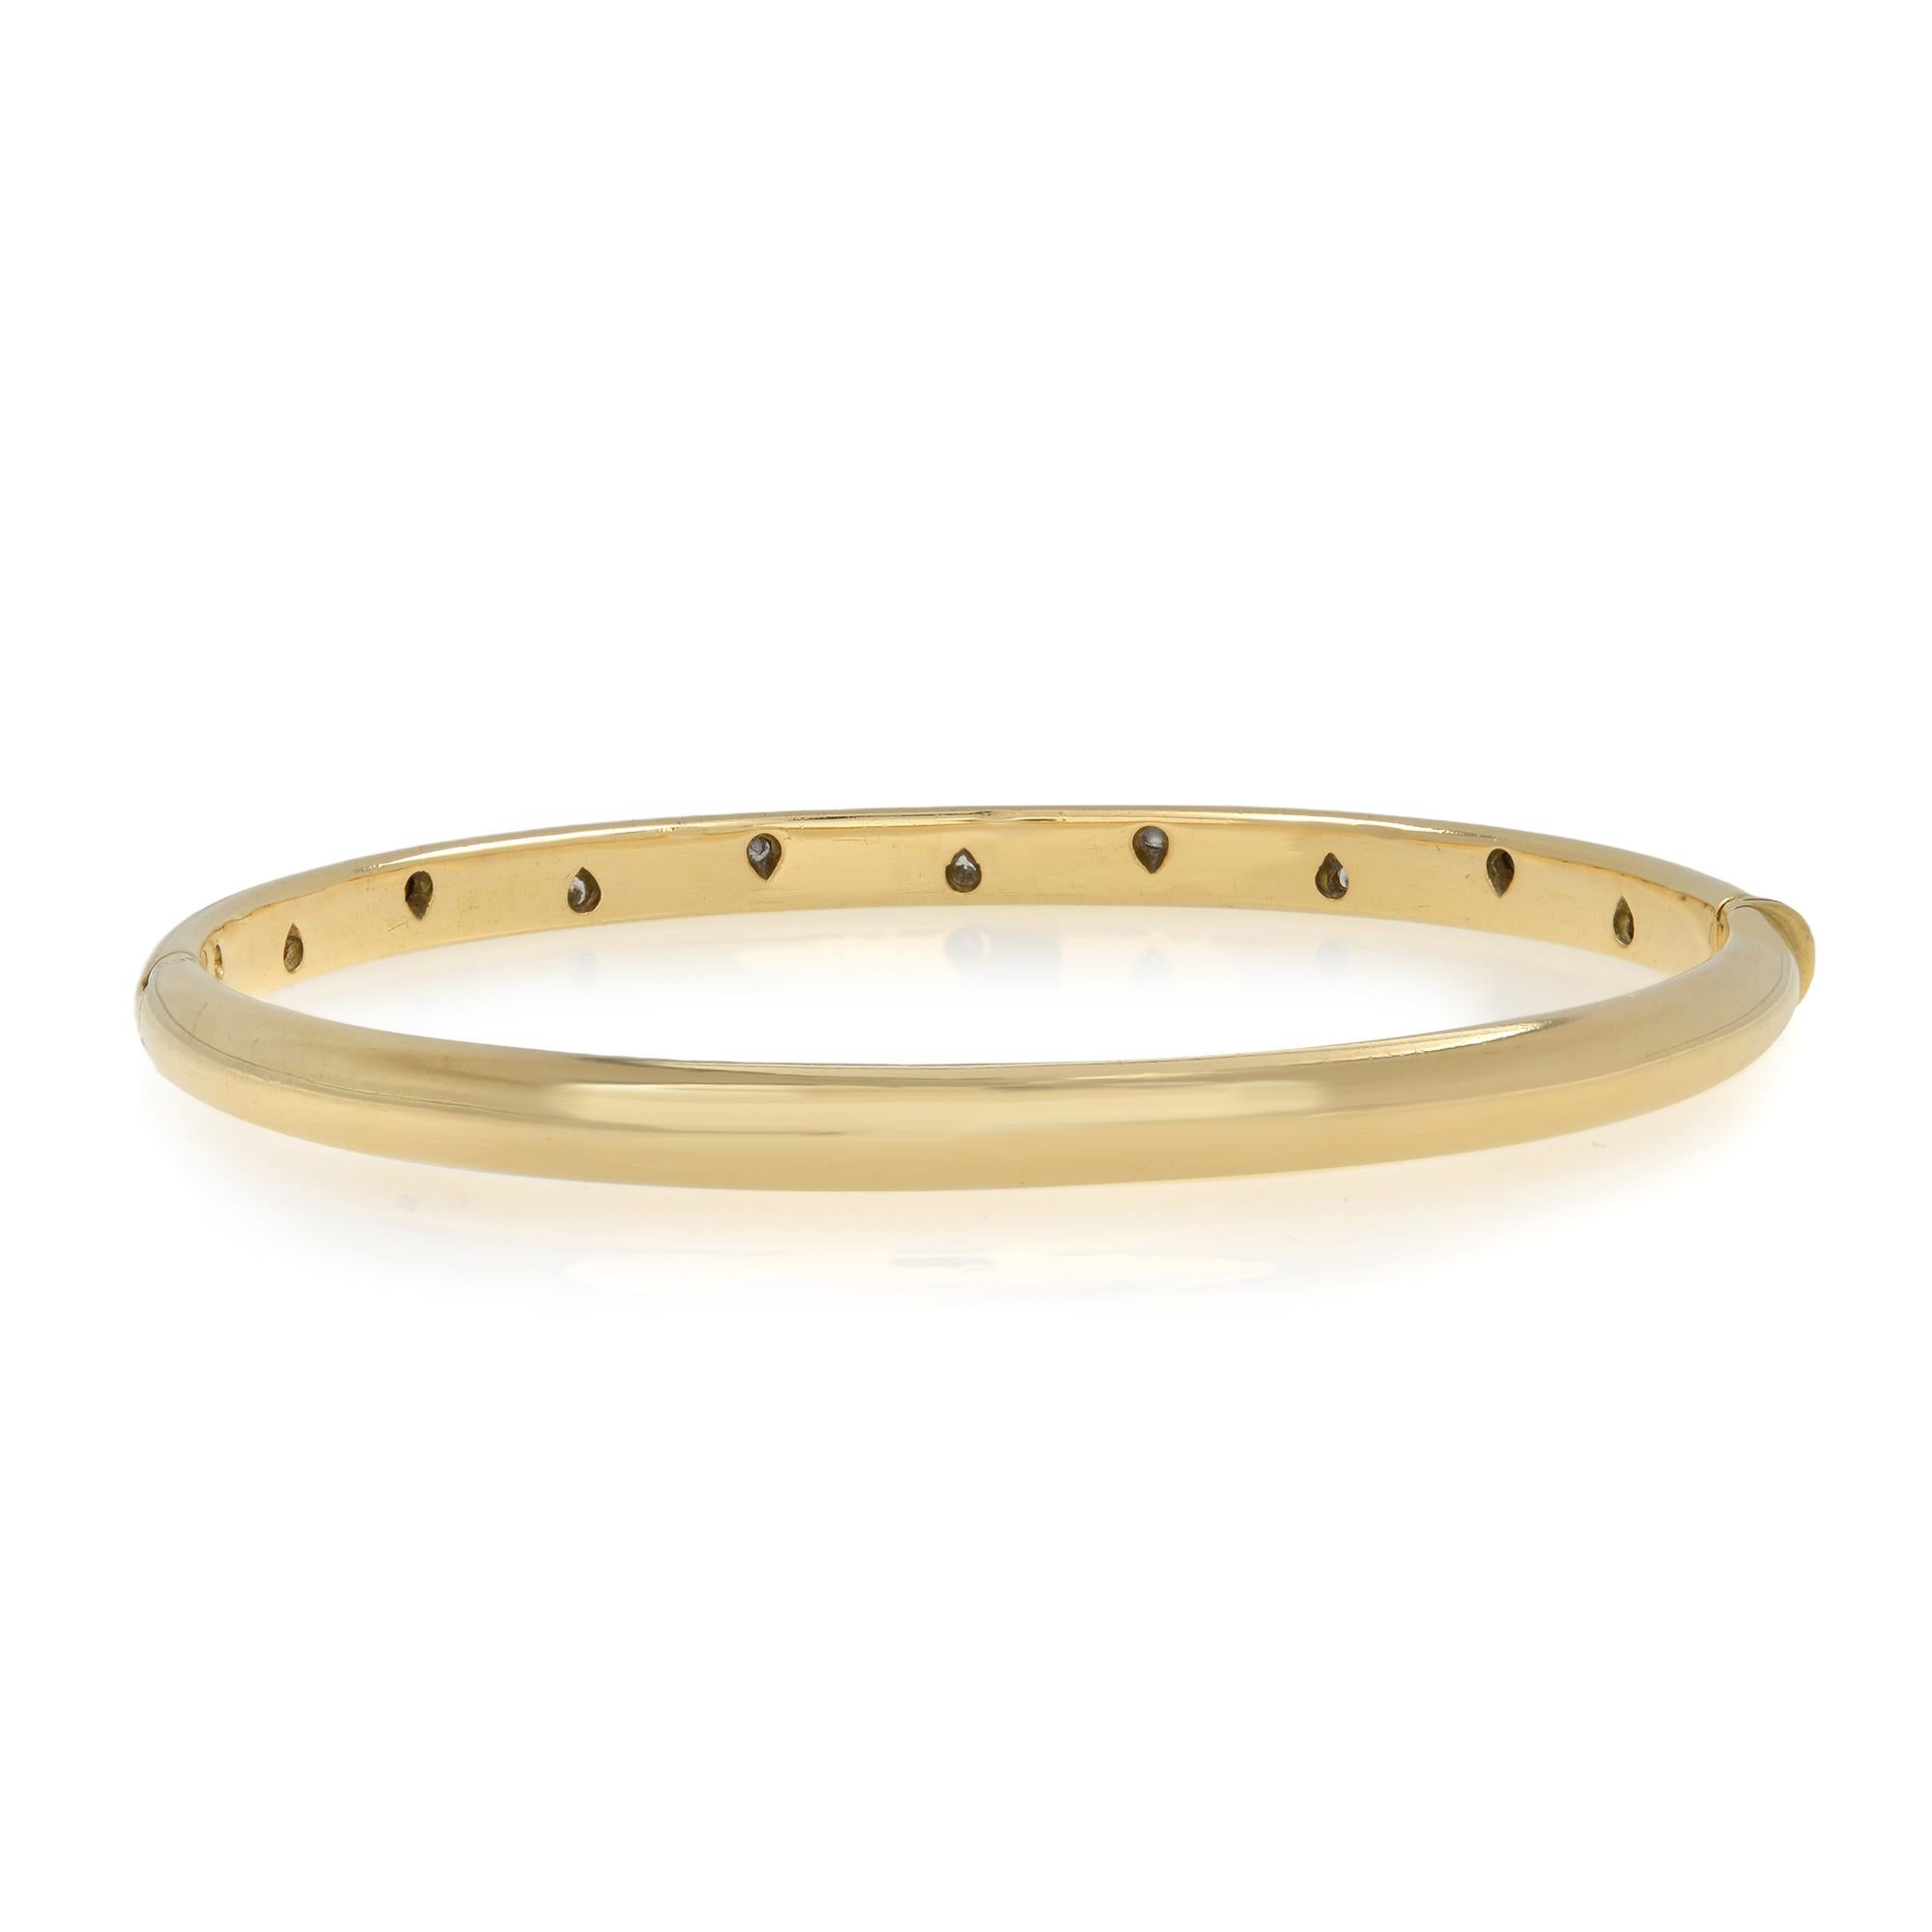 Simple and modern, the designs of the Etoile collection are elegantly punctuated with brilliant diamonds. This elegant bangle is a timeless finishing touch to any look. Crafted in 18k yellow gold. Bezel set with round cut diamonds. Total carat